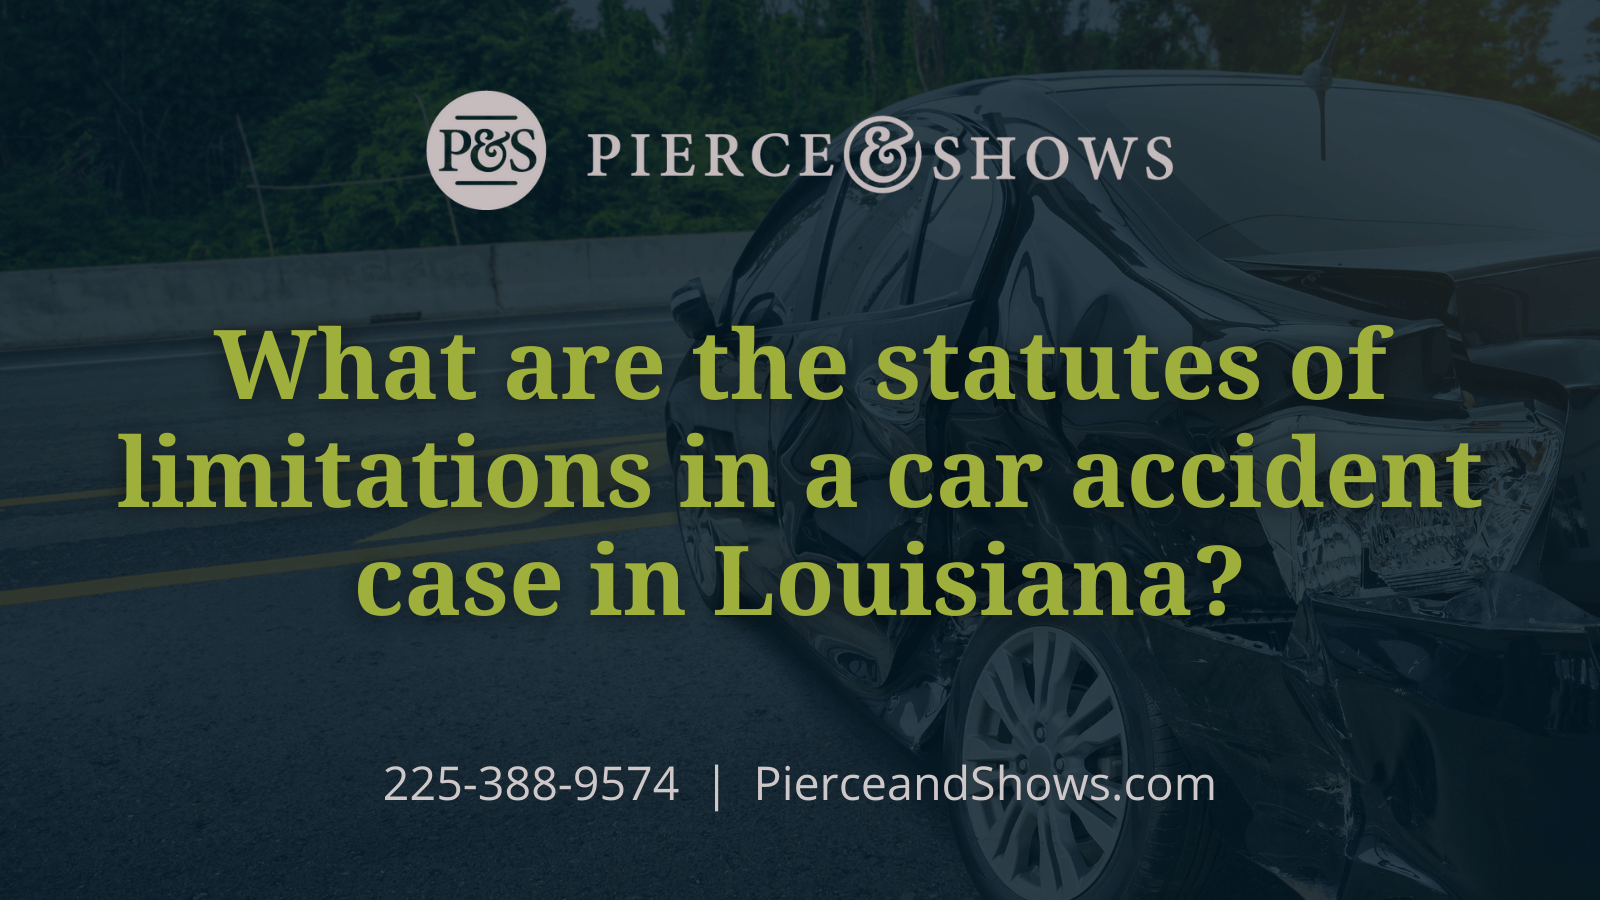 What are the statutes of limitations in a car accident case in Louisiana? - Baton Rouge Louisiana injury attorney Pierce & Shows